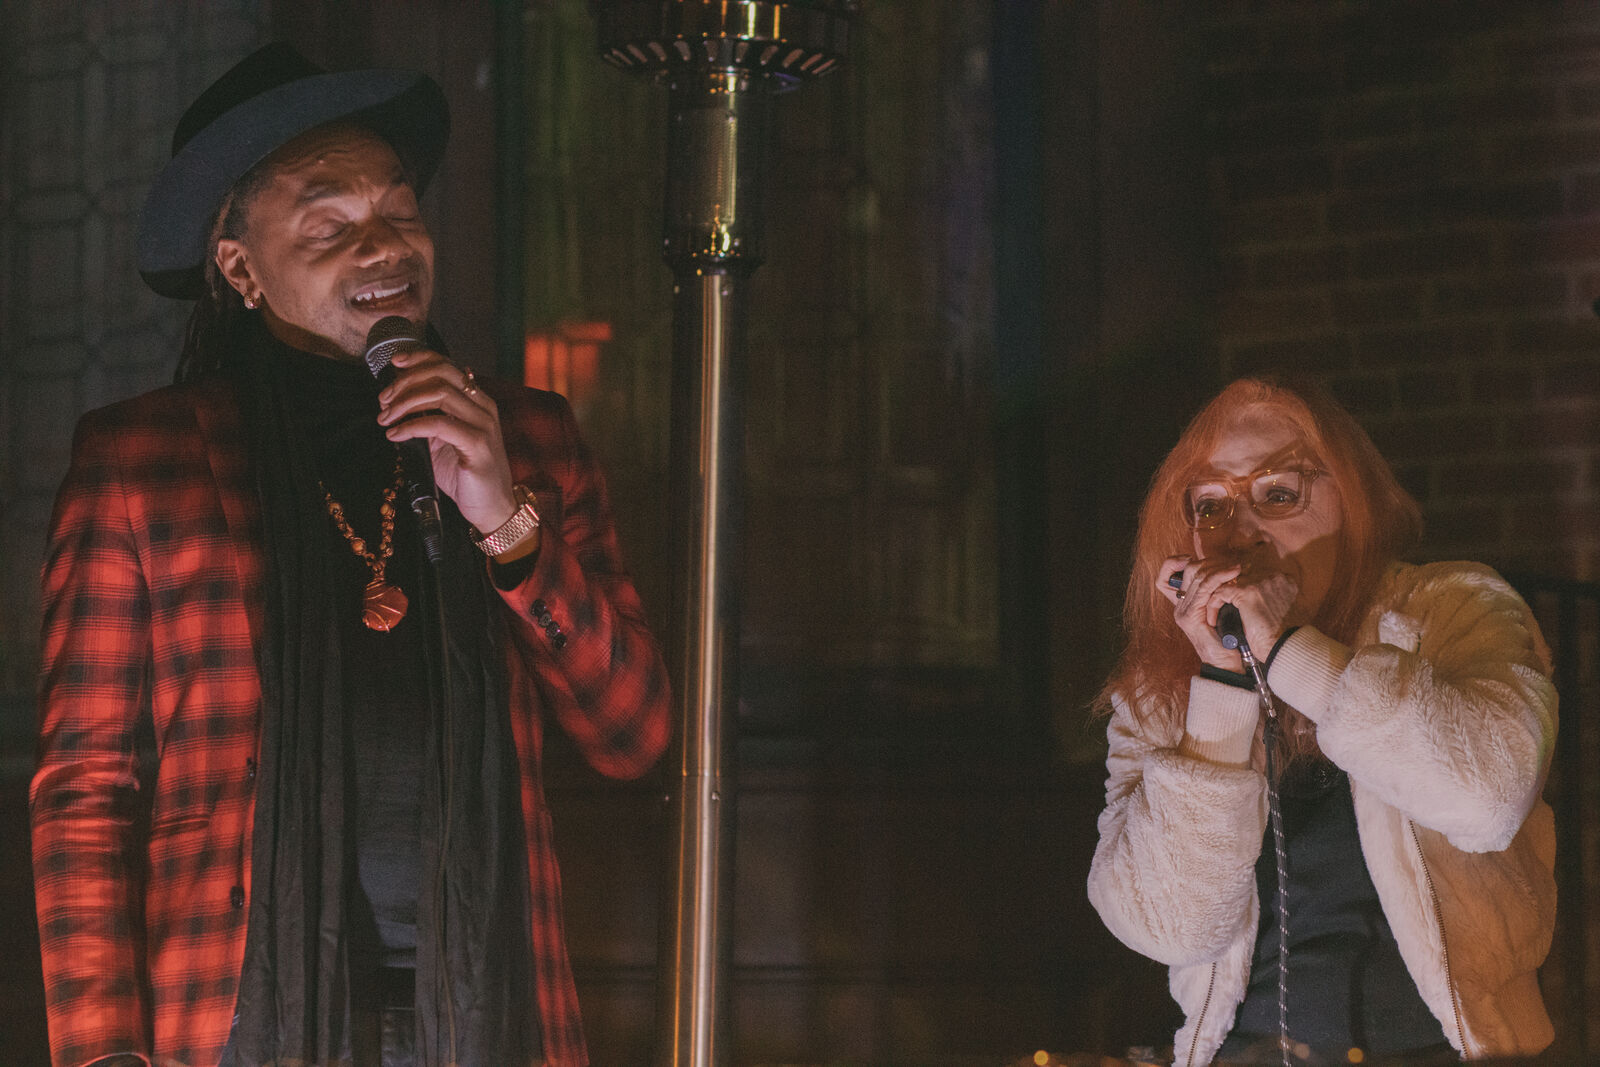 Two performers at night. On the left a male singer holds a microphone; he is clad in a plaid red and black blazer and wearing a fedora. On the right, a female musician plays the harmonic. She has eyeglasses, red hair and wears a white fuzzy coat.